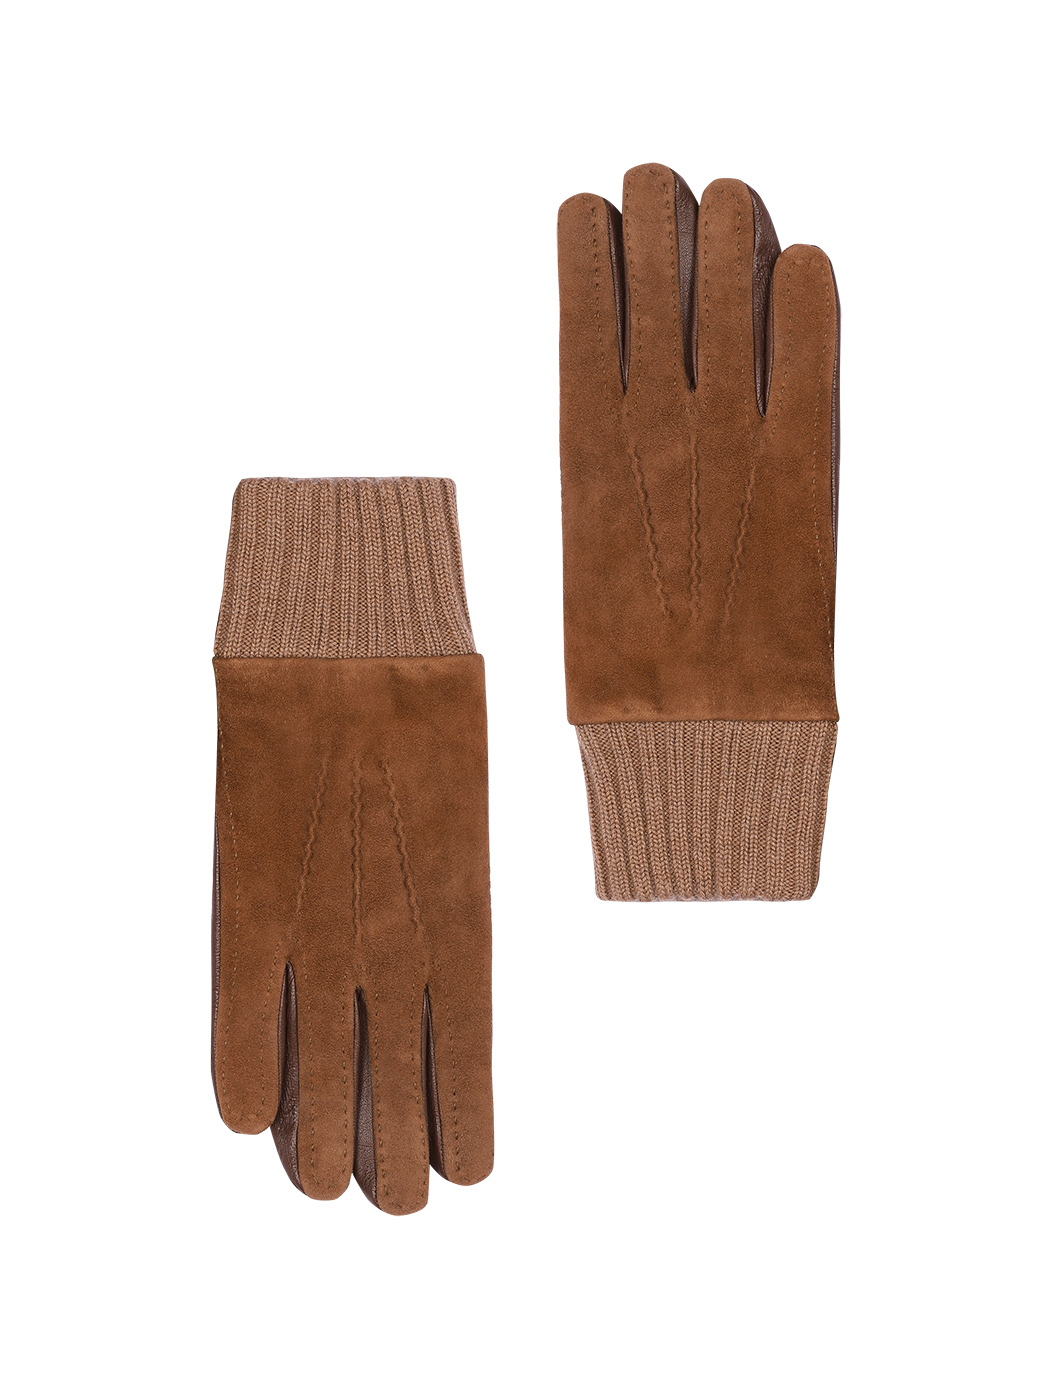 Men's Gloves in Suede with Knit Cuff Tan